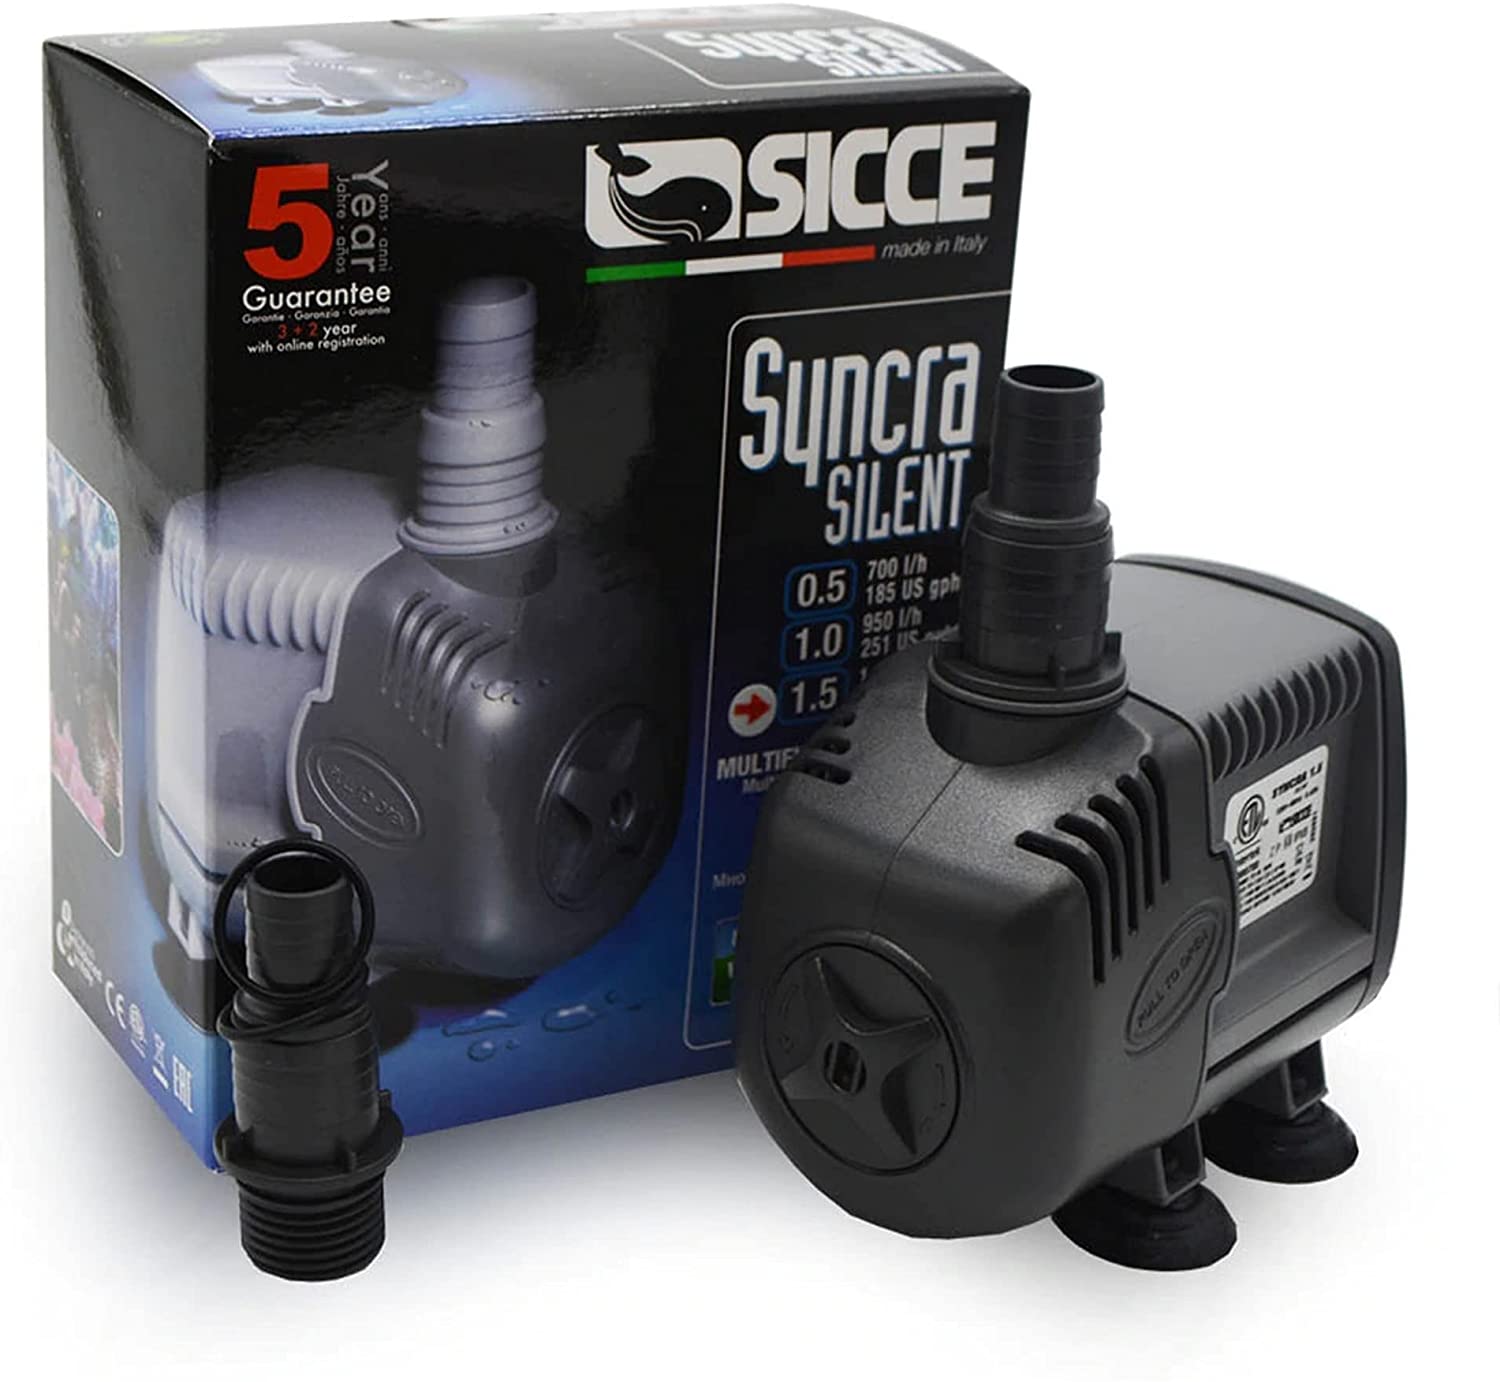 Sicce Syncra Silent Multi-Purpose Pump, Designed for Freshwater and Saltwater